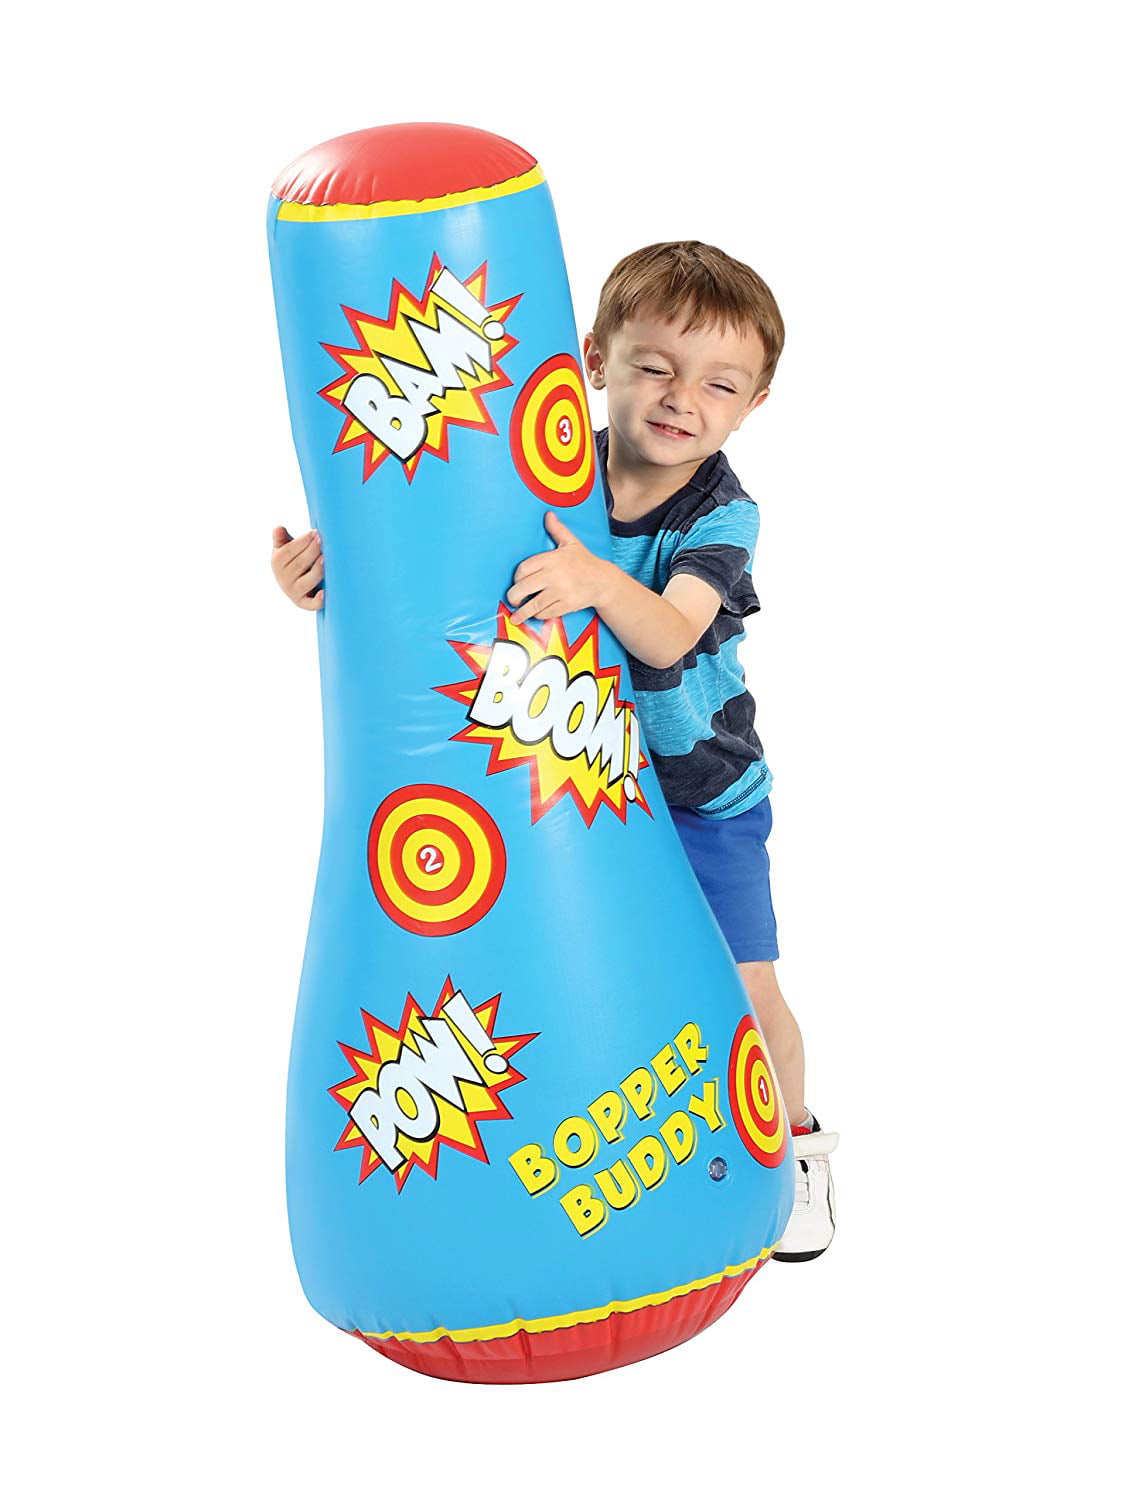 ETNA Products Inflatable Punching Bag for Kids: Free Standing Boxing Toy for Children, Air Bop Bag for Boys & Girls, Exercise & Stress Relief